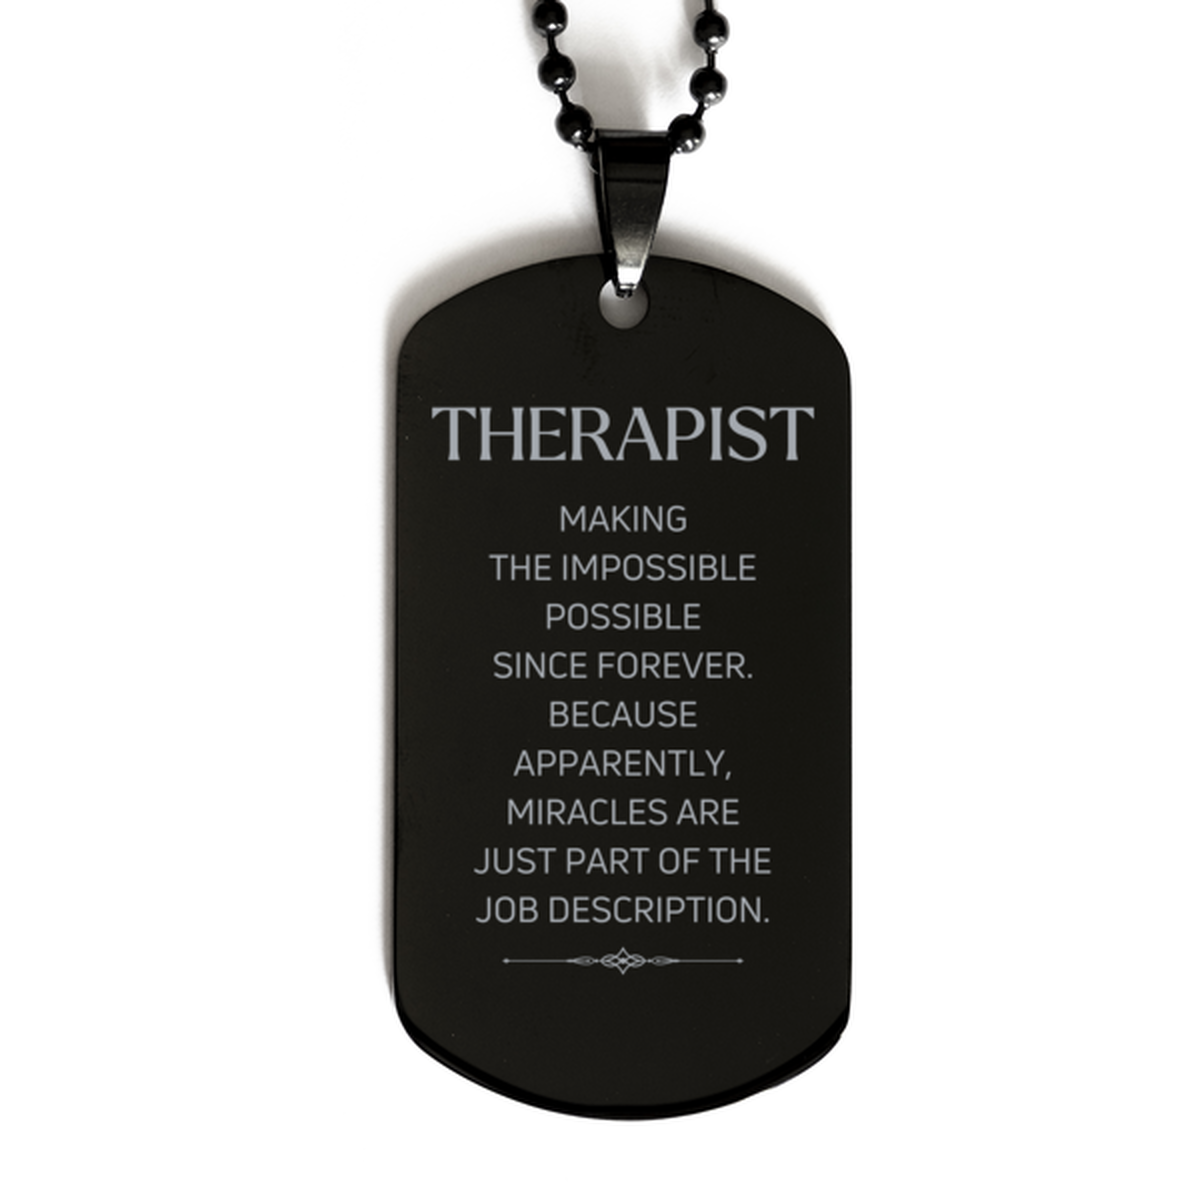 Funny Therapist Gifts, Miracles are just part of the job description, Inspirational Birthday Black Dog Tag For Therapist, Men, Women, Coworkers, Friends, Boss